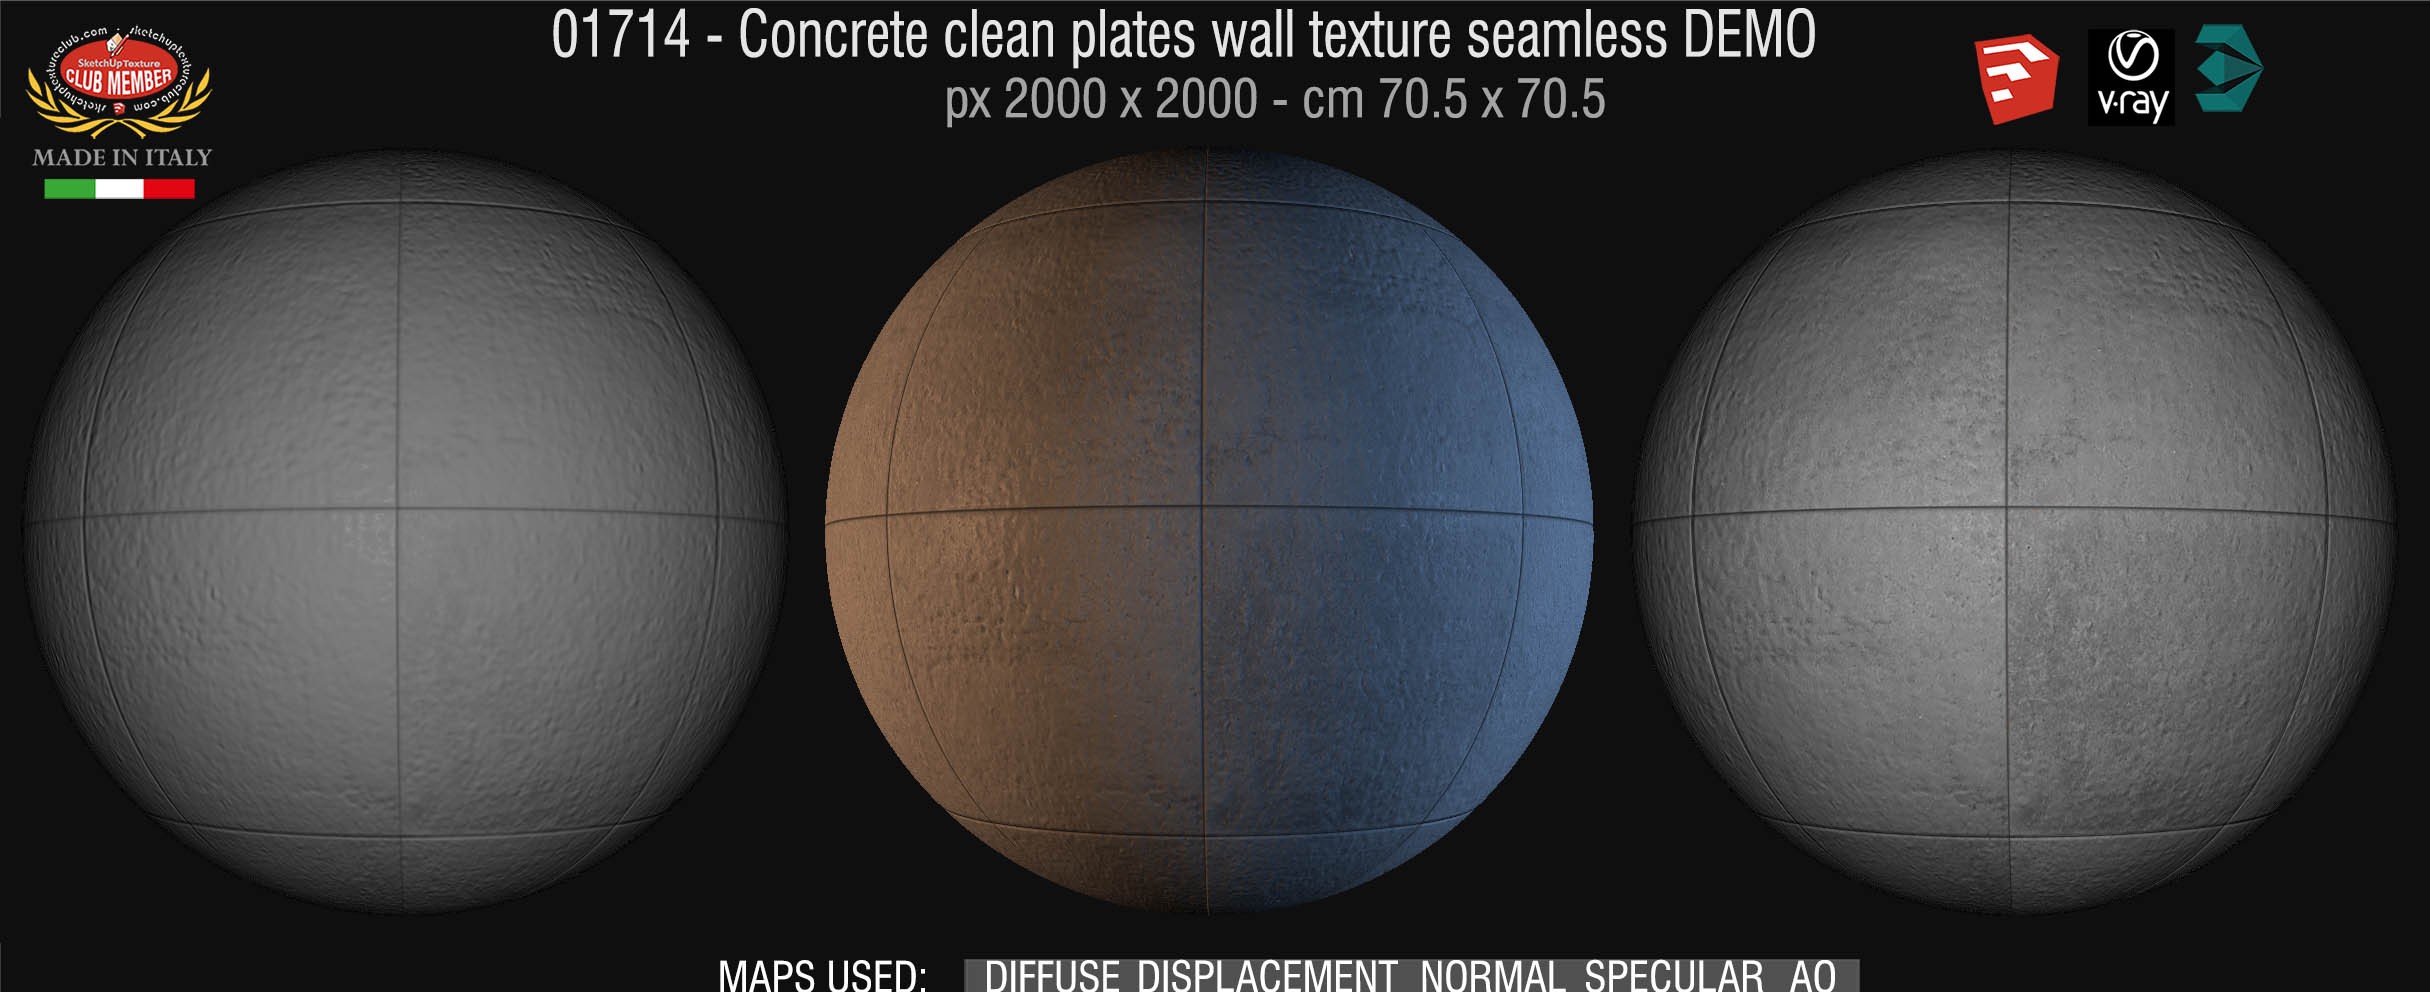 01714 Concrete clean plates wall texture seamless + maps DEMO